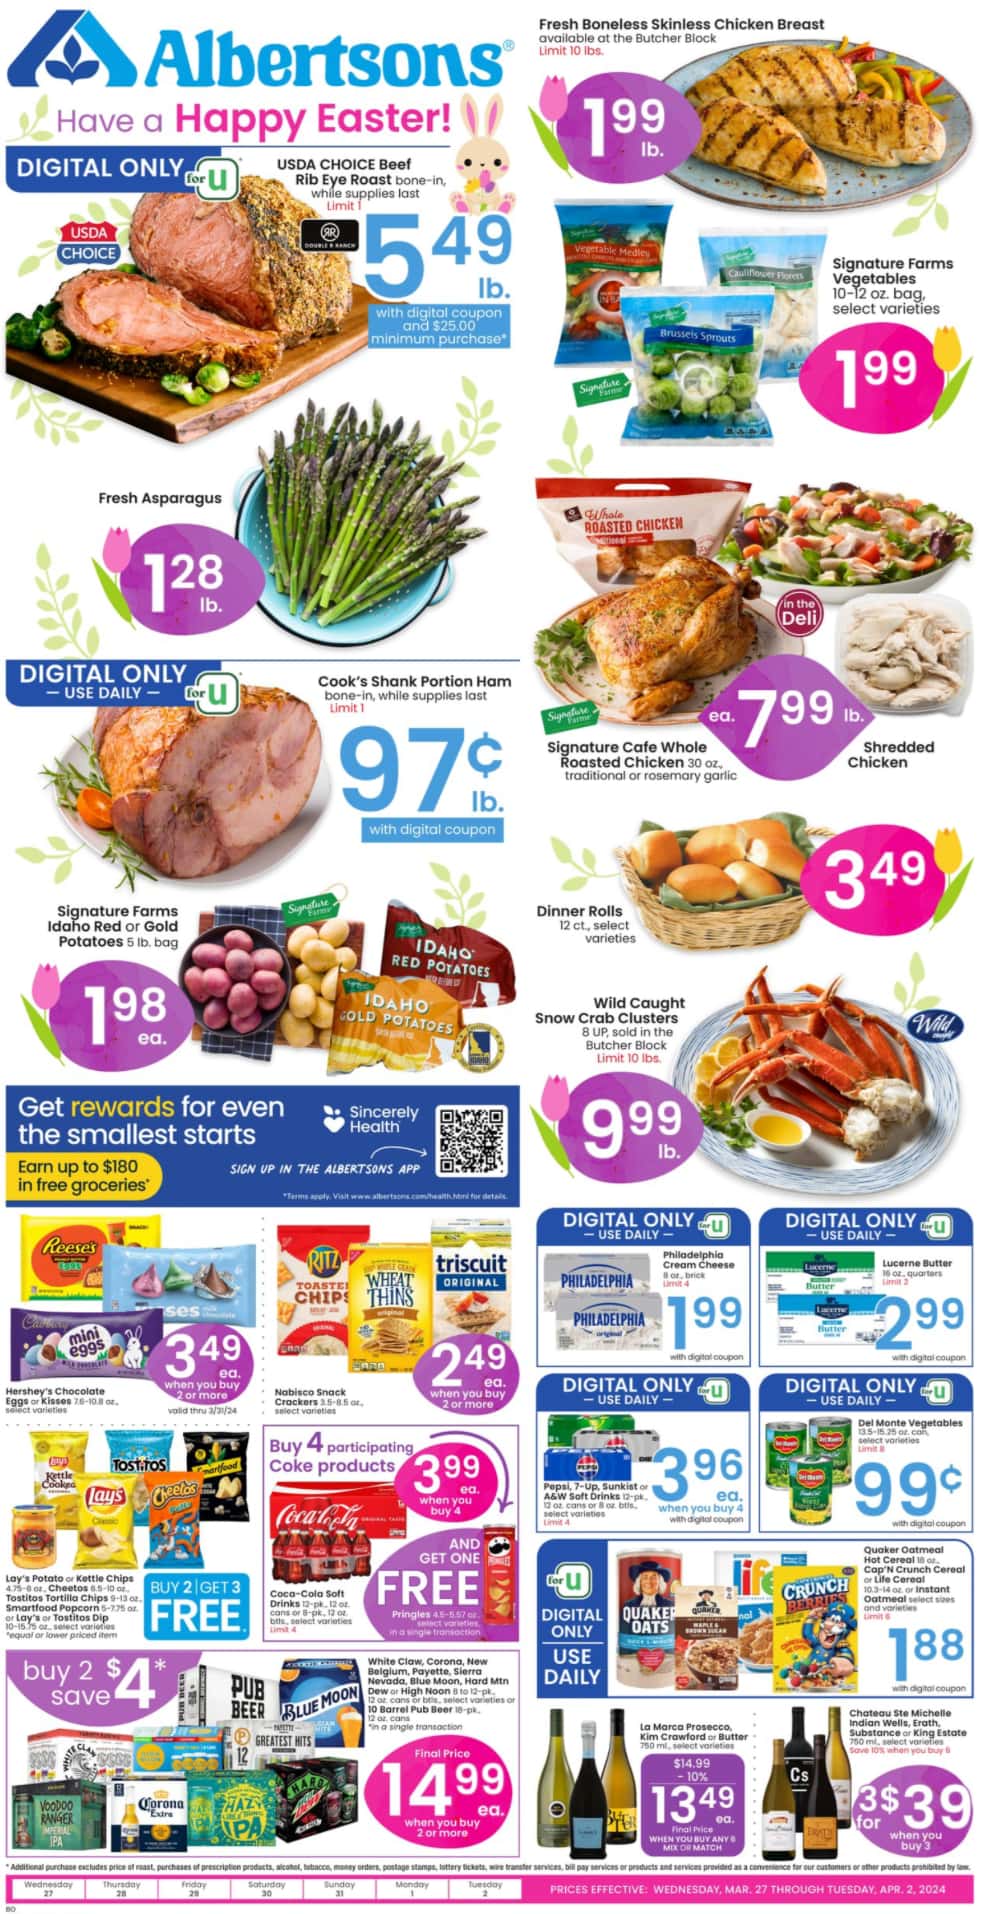 Albertsons_weekly_ad_032724_01